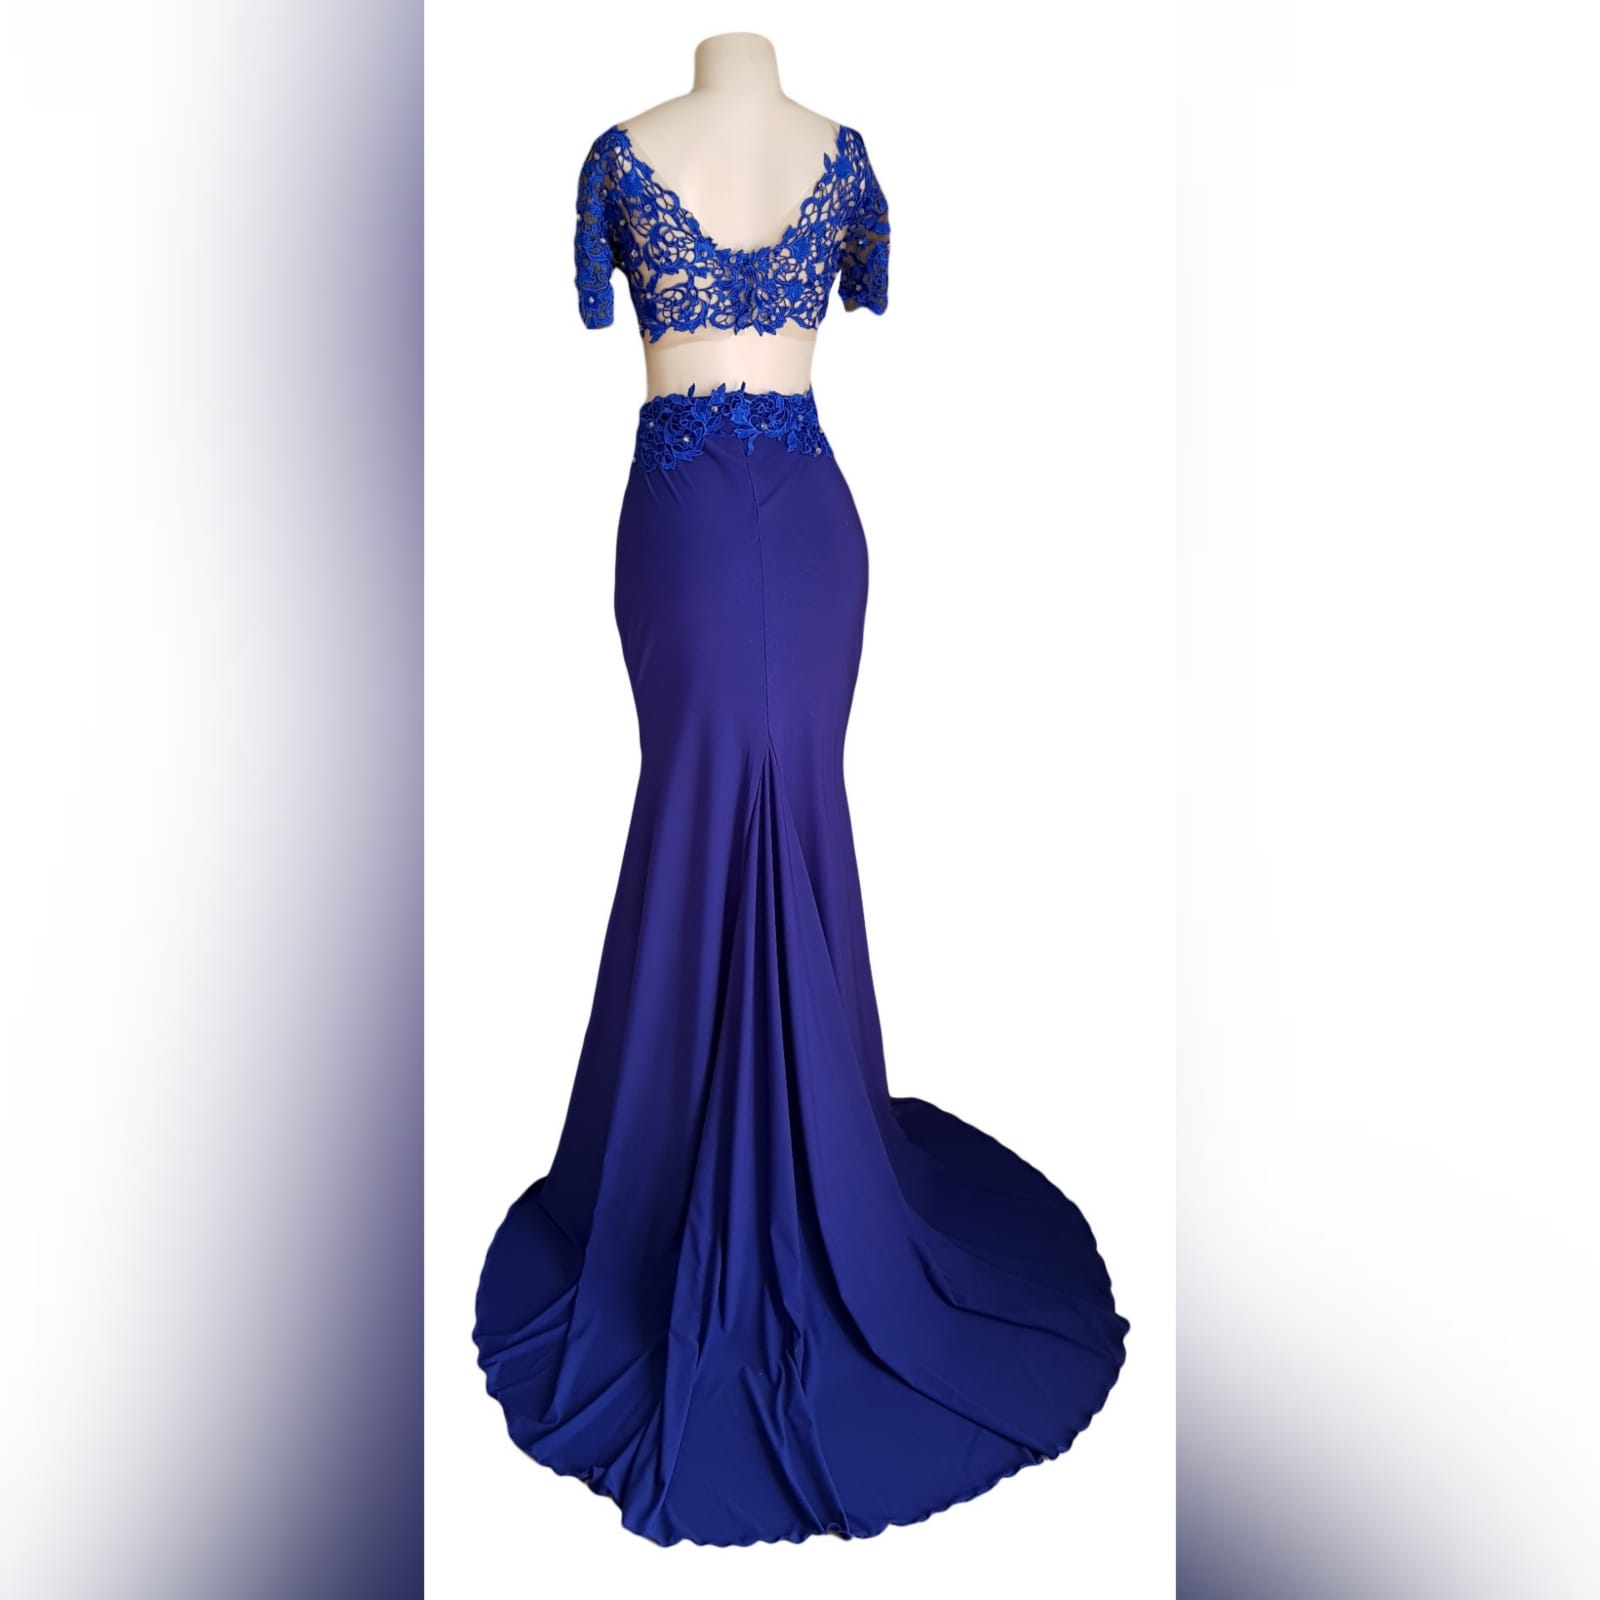 Royal blue shimmer long prom dress 8 royal blue shimmer long prom dress with a lace illusion bodice, side tummy & back opening with a sweetheart neckline. Slit and a train. Lace detailed with gold beads.